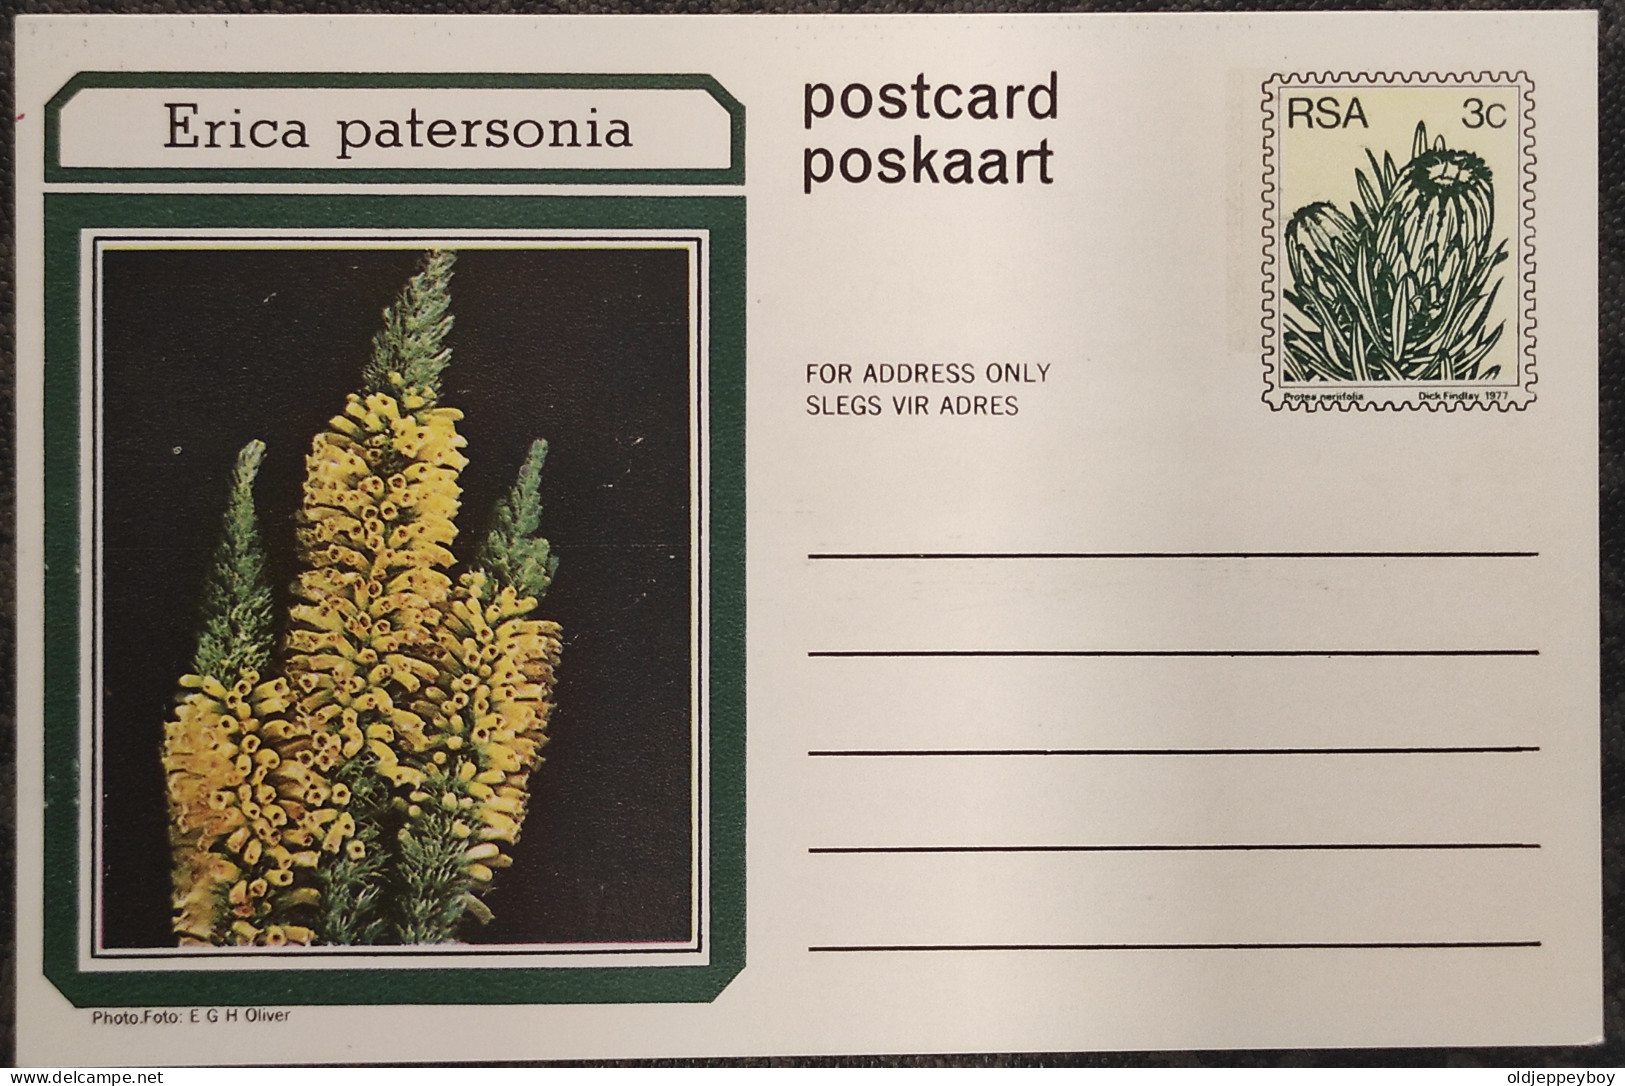 3c SOUTH AFRICA Postal STATIONERY CARD Illus ERICA PATERSONIA FLOWER Cover Stamps Flowers Rsa - Brieven En Documenten